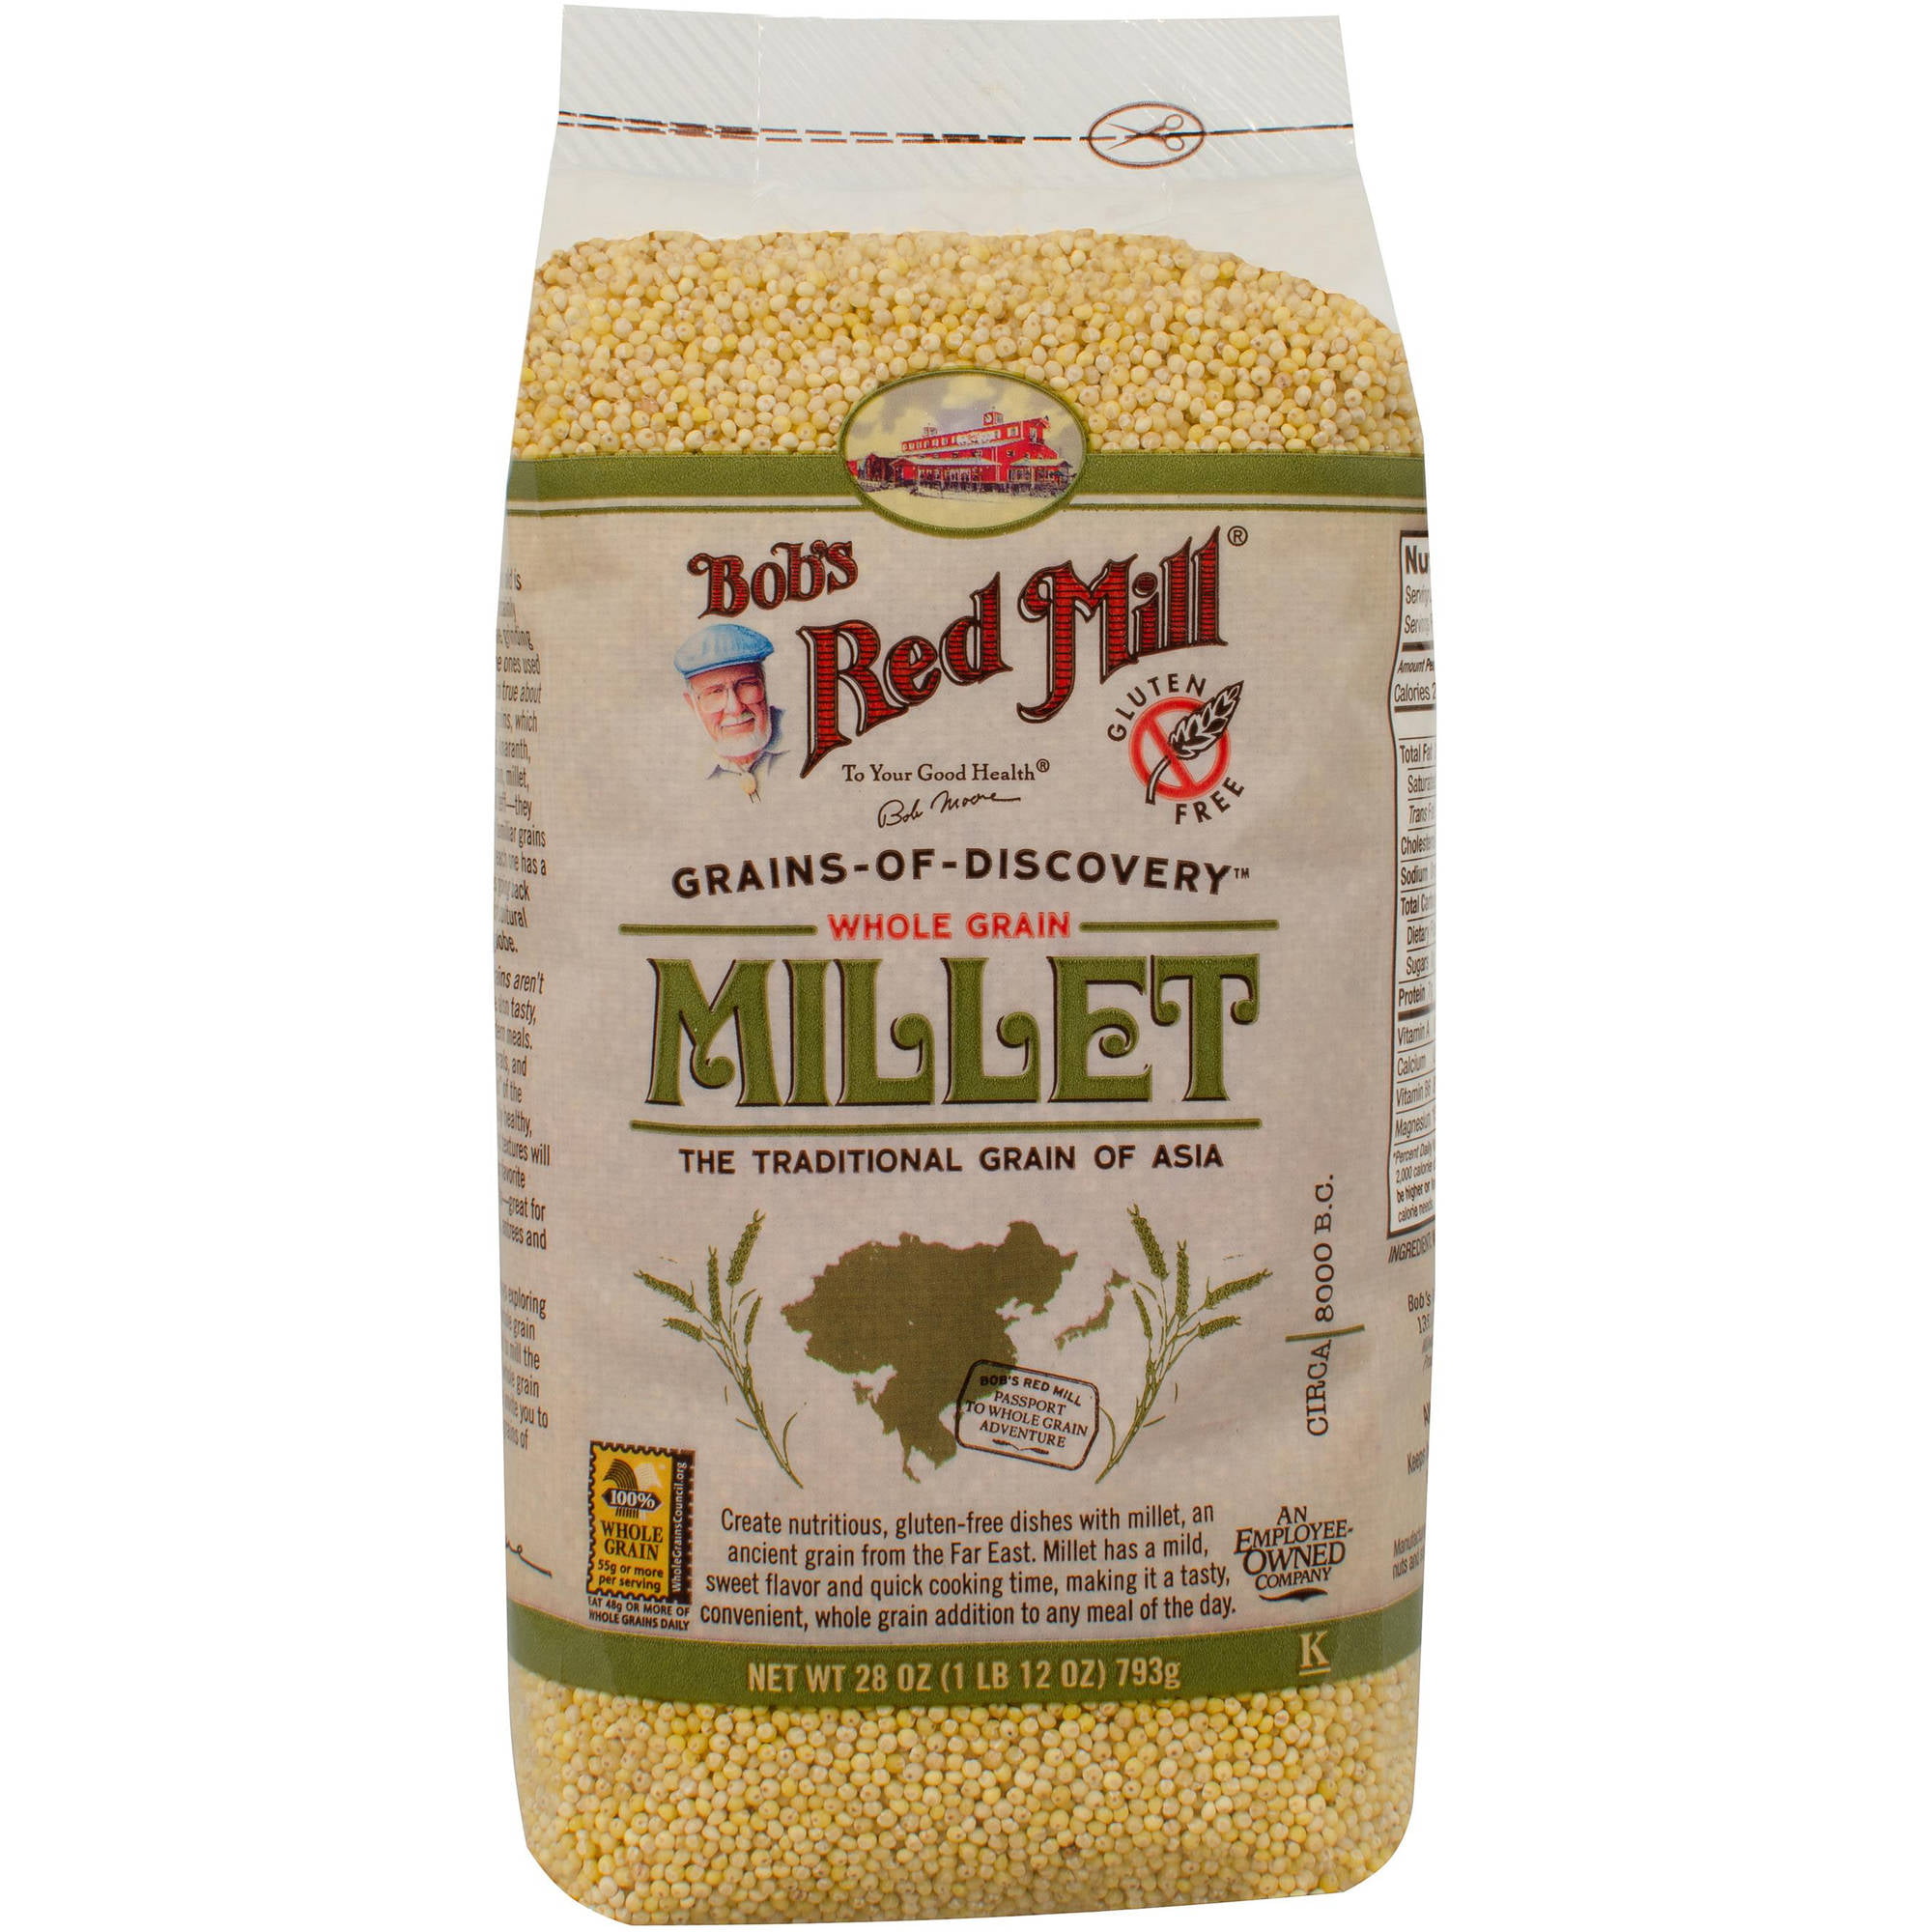 Red Mill Whole Grain Hulled Millet, 28 oz (Pack of 4) - Walmart.com